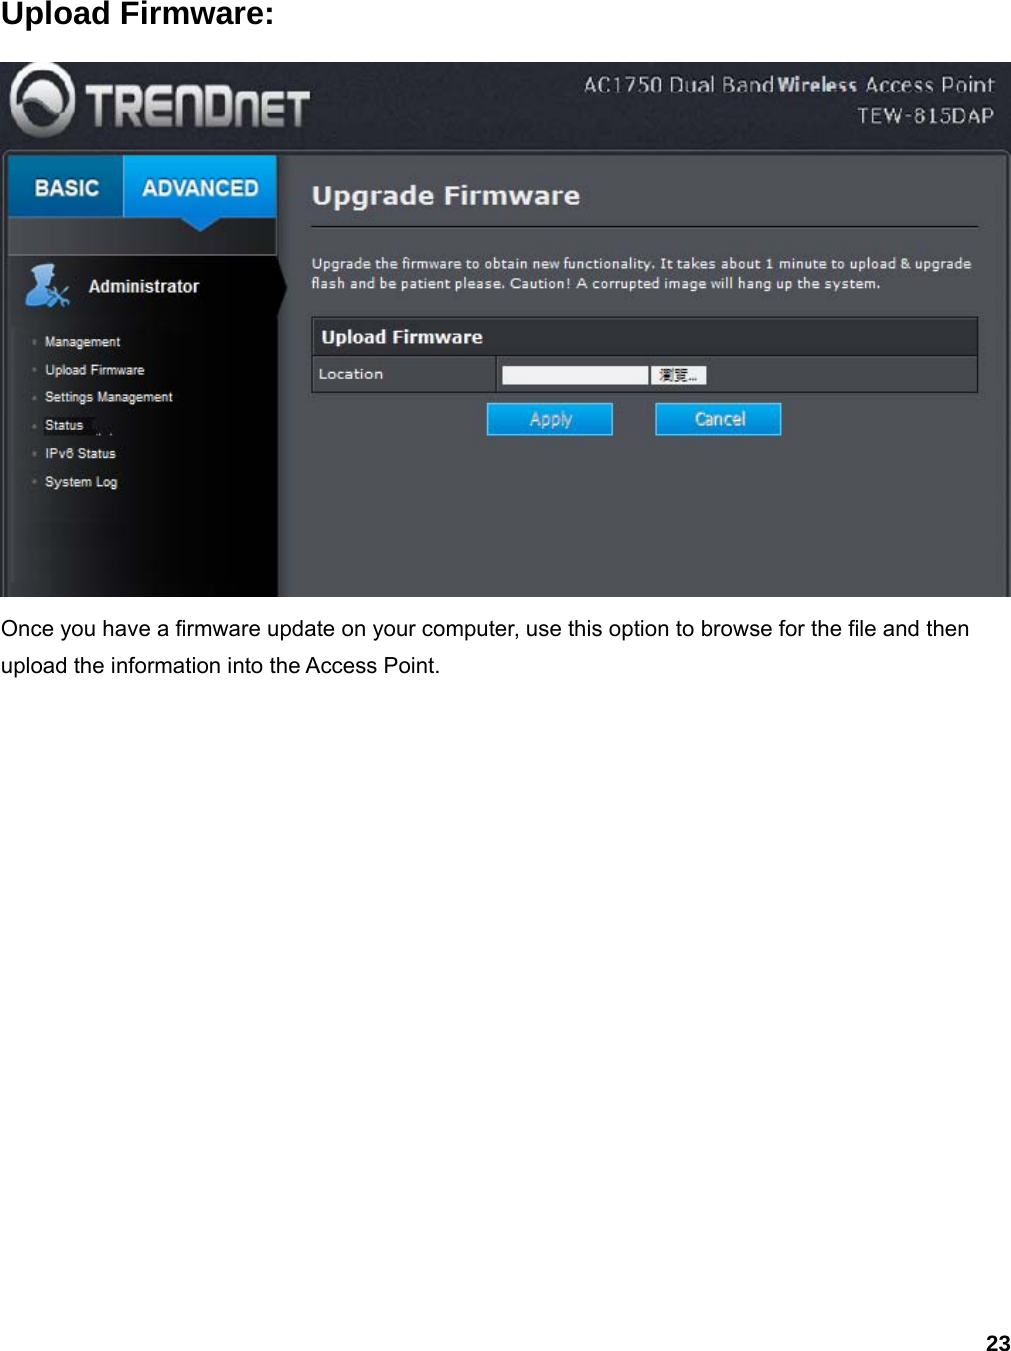 23 Upload Firmware:  Once you have a firmware update on your computer, use this option to browse for the file and then upload the information into the Access Point. 